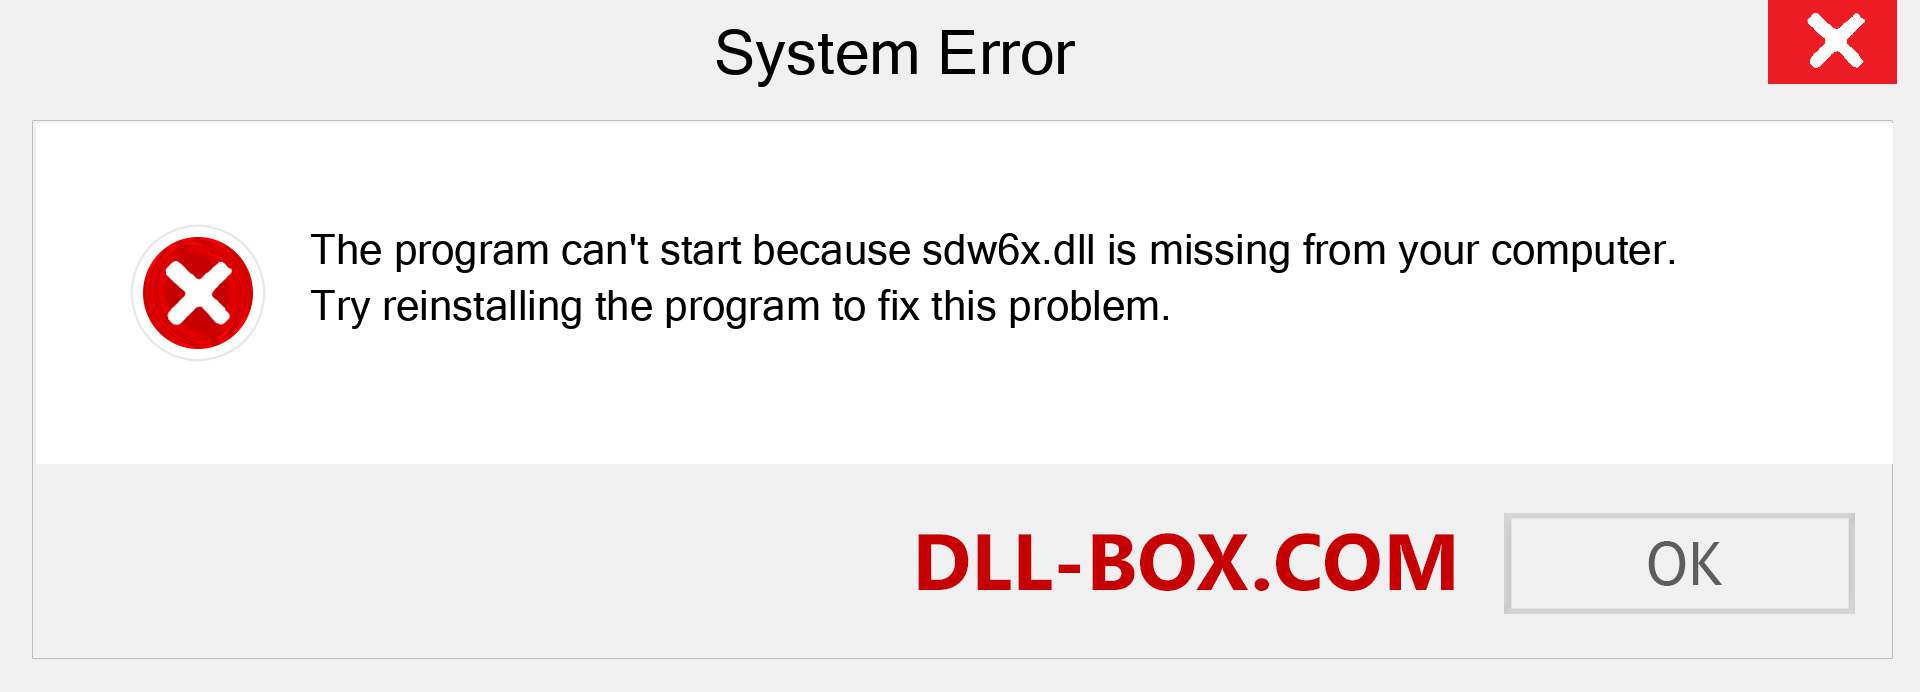  sdw6x.dll file is missing?. Download for Windows 7, 8, 10 - Fix  sdw6x dll Missing Error on Windows, photos, images